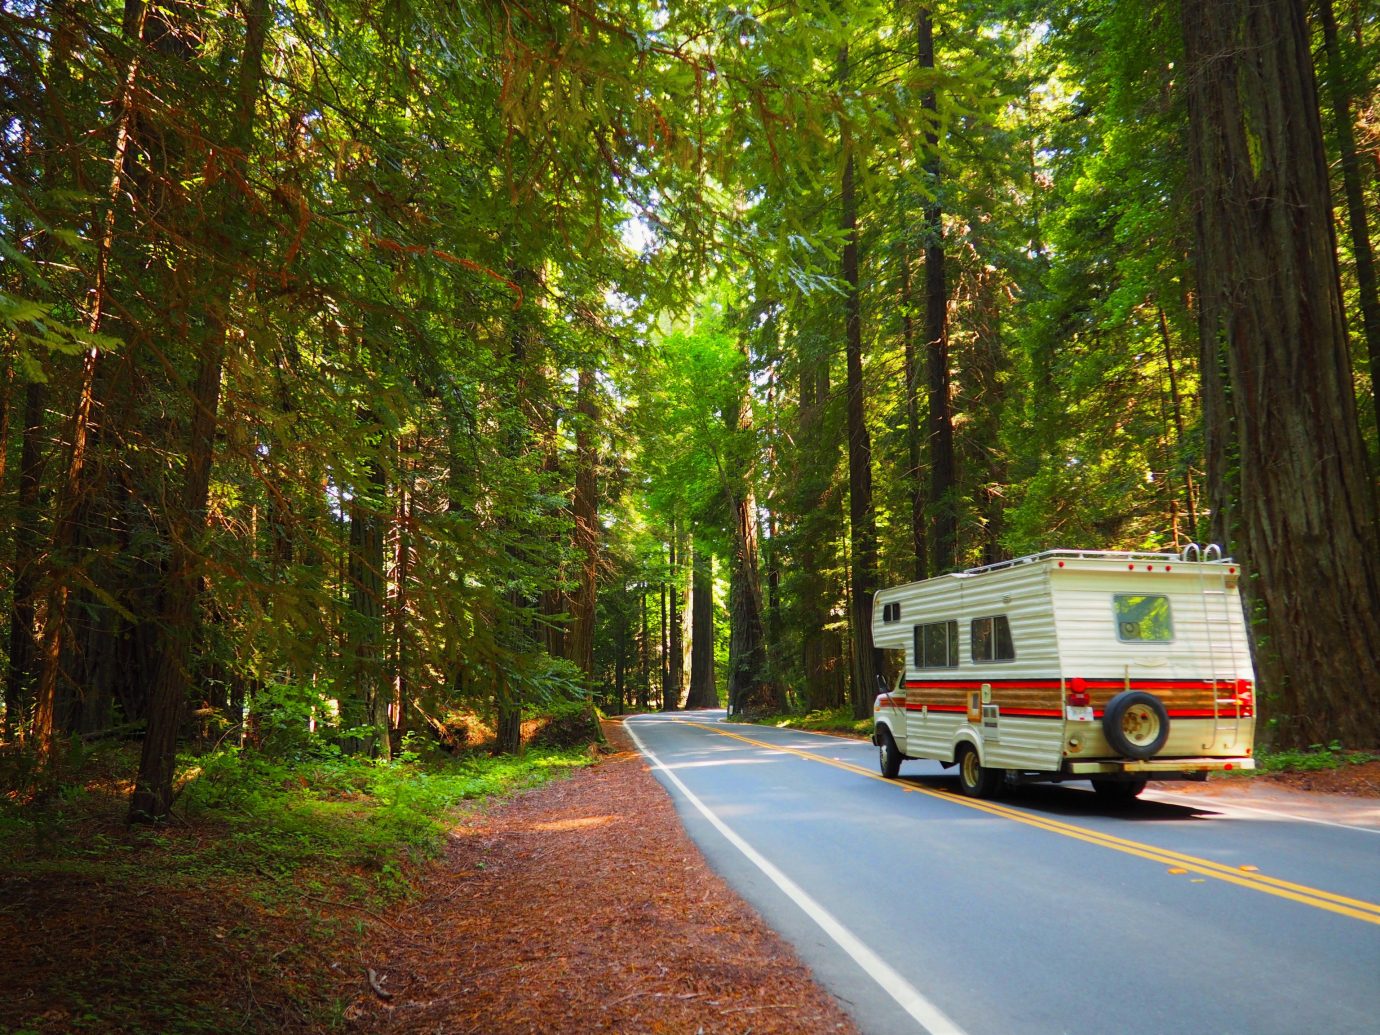 Family Travel National Parks Trip Ideas tree outdoor road habitat bus natural environment driving Forest season woody plant autumn woodland vehicle traveling wooded